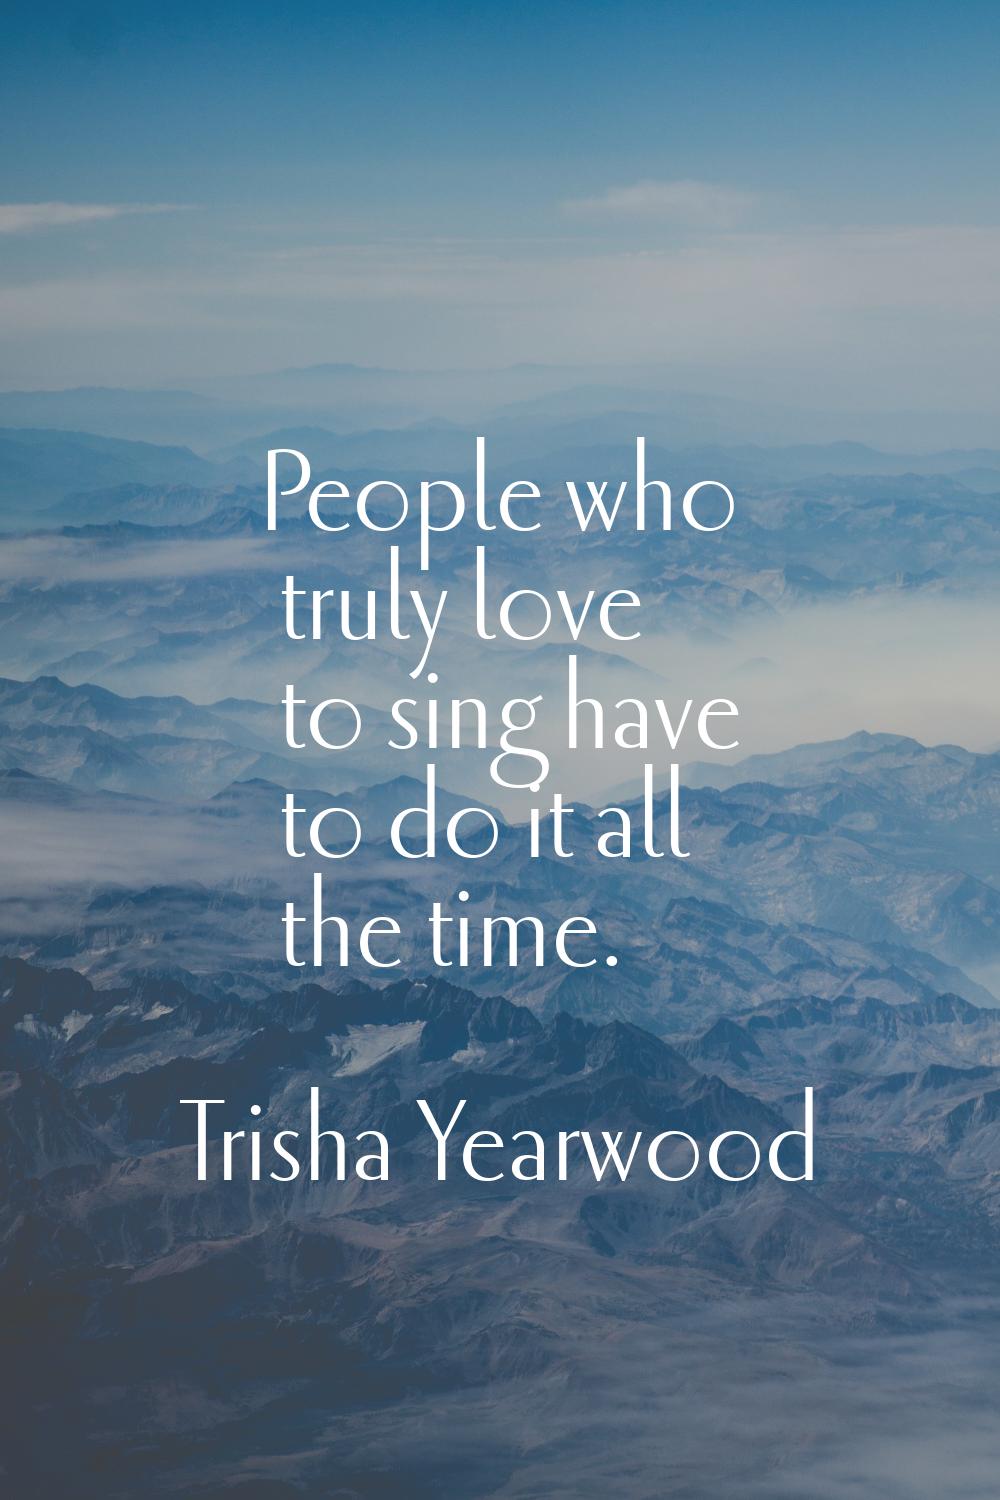 People who truly love to sing have to do it all the time.